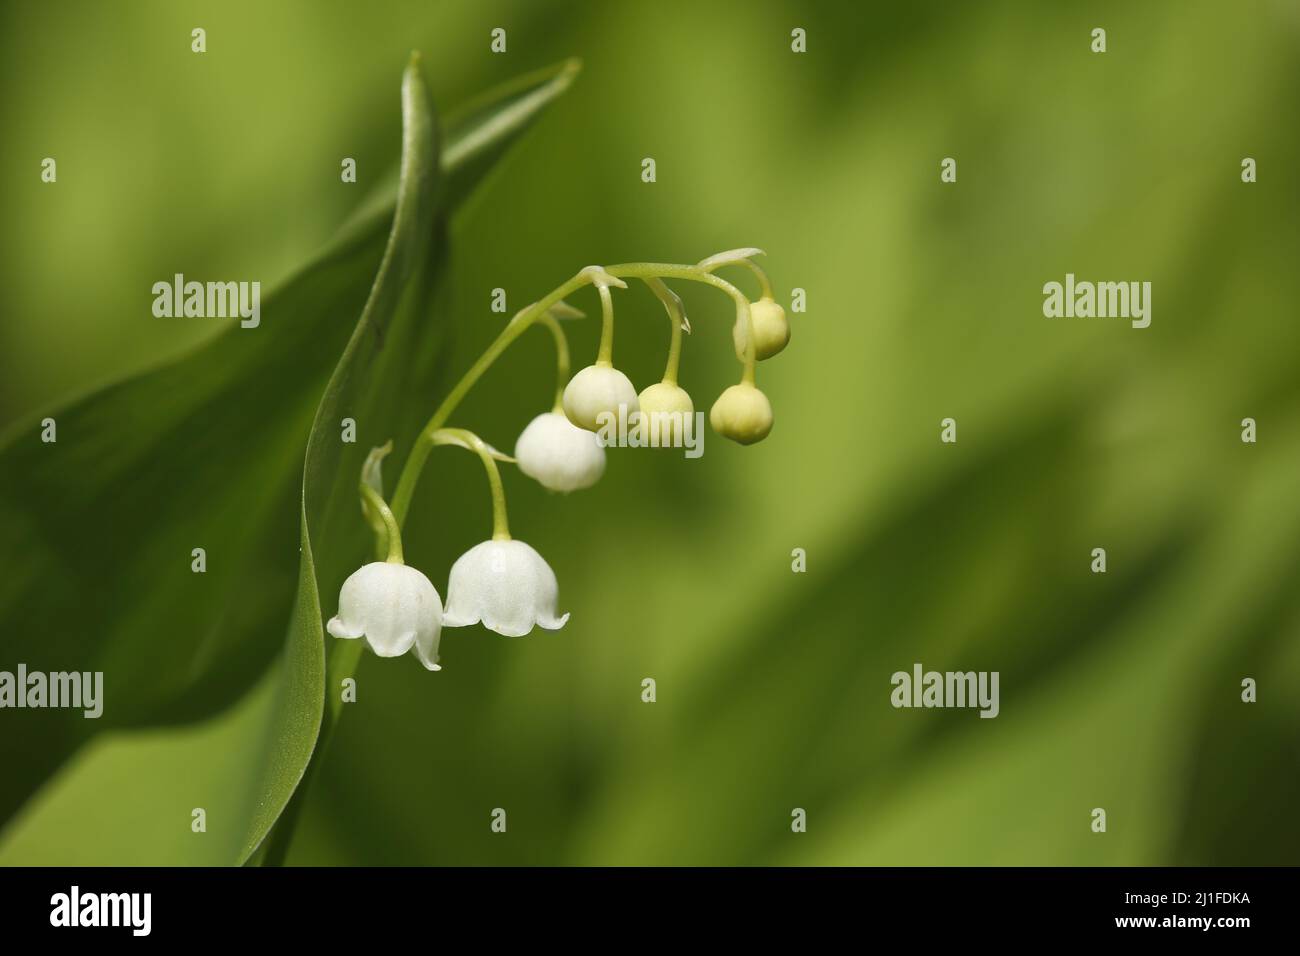 Lily of the valley (Convallaria majalis) in Liliental, Kaiserstuhl, Baden-Württemberg, Germany Stock Photo